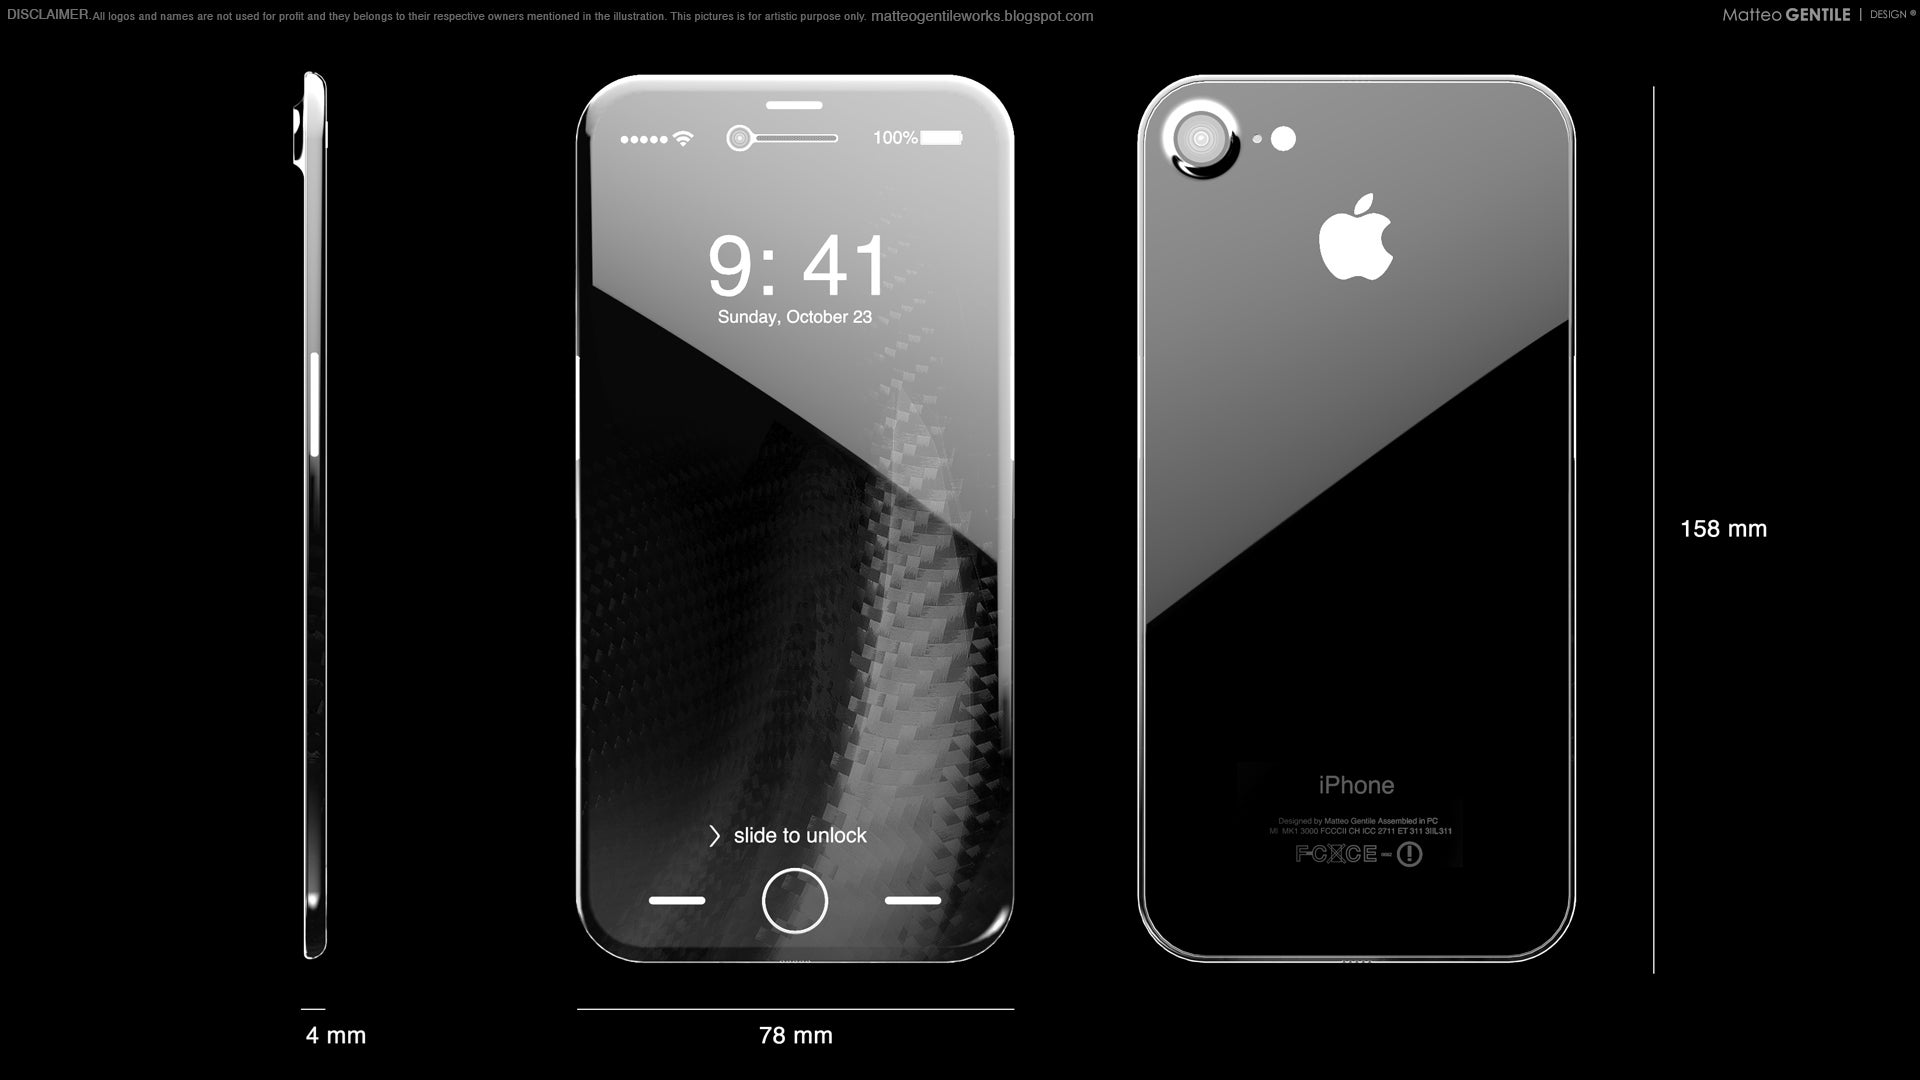 As this OLED iPhone concept image depicts, such a handset may be pretty expensive to make - Apple's iPhone 8 OLED display orders may hit its margins with $50 million this quarter